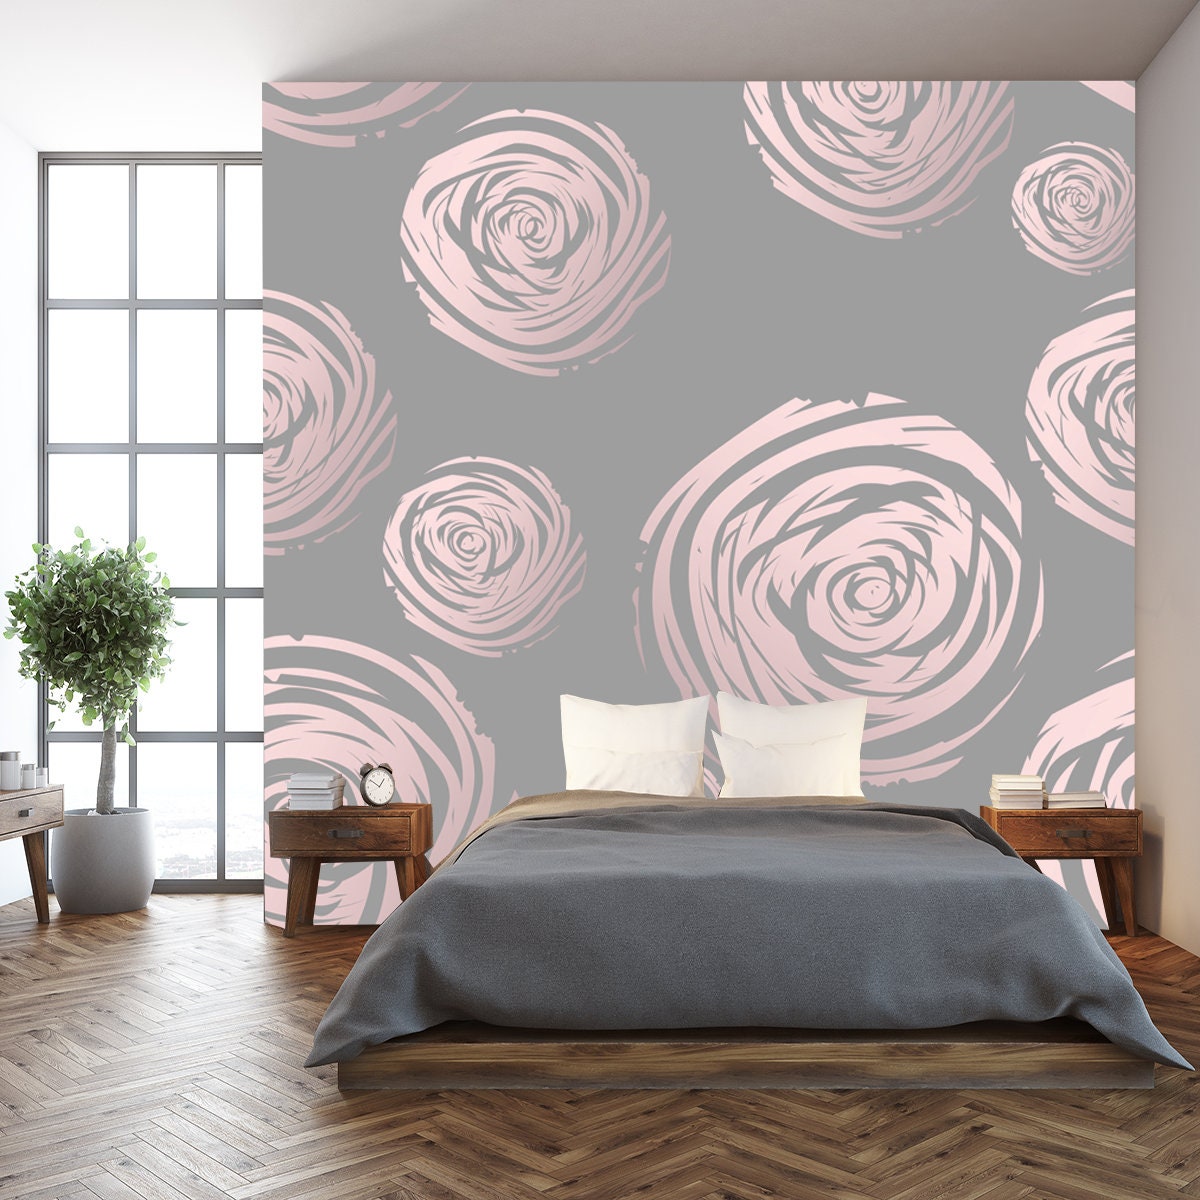 Gold Abstract Roses on Grey Background Wallpaper Bedroom Mural